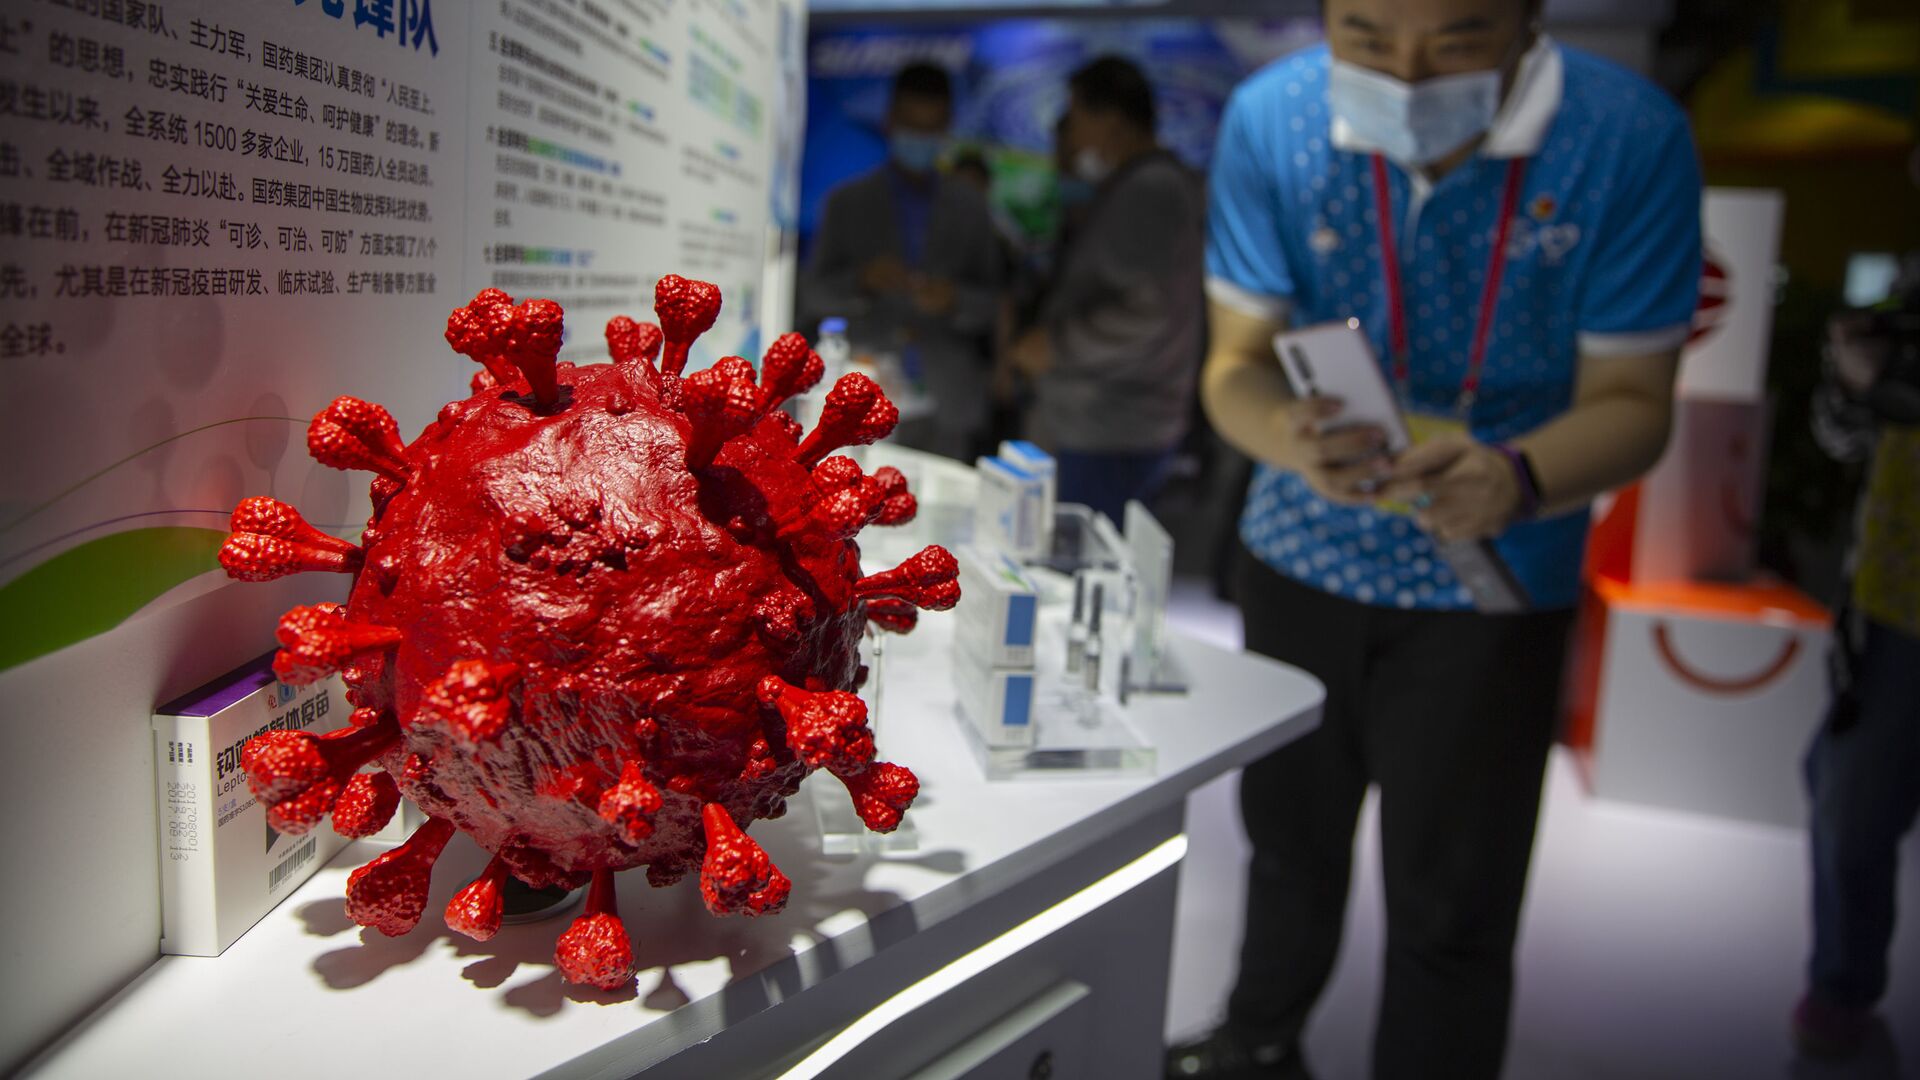 A visitor wearing a face mask takes a photo of a model of a coronavirus and boxes for COVID-19 vaccines at a display by Chinese pharmaceutical firm Sinopharm at the China International Fair for Trade in Services (CIFTIS) in Beijing, Saturday, Sept. 5, 2020. With the COVID-19 pandemic largely under control, China's capital on Saturday kicked off one of the first large-scale public events since the start of the coronavirus outbreak, as tens of thousands of attendees were expected to visit displays from nearly 2,000 Chinese and foreign companies showcasing their products and services. - Sputnik International, 1920, 06.09.2021